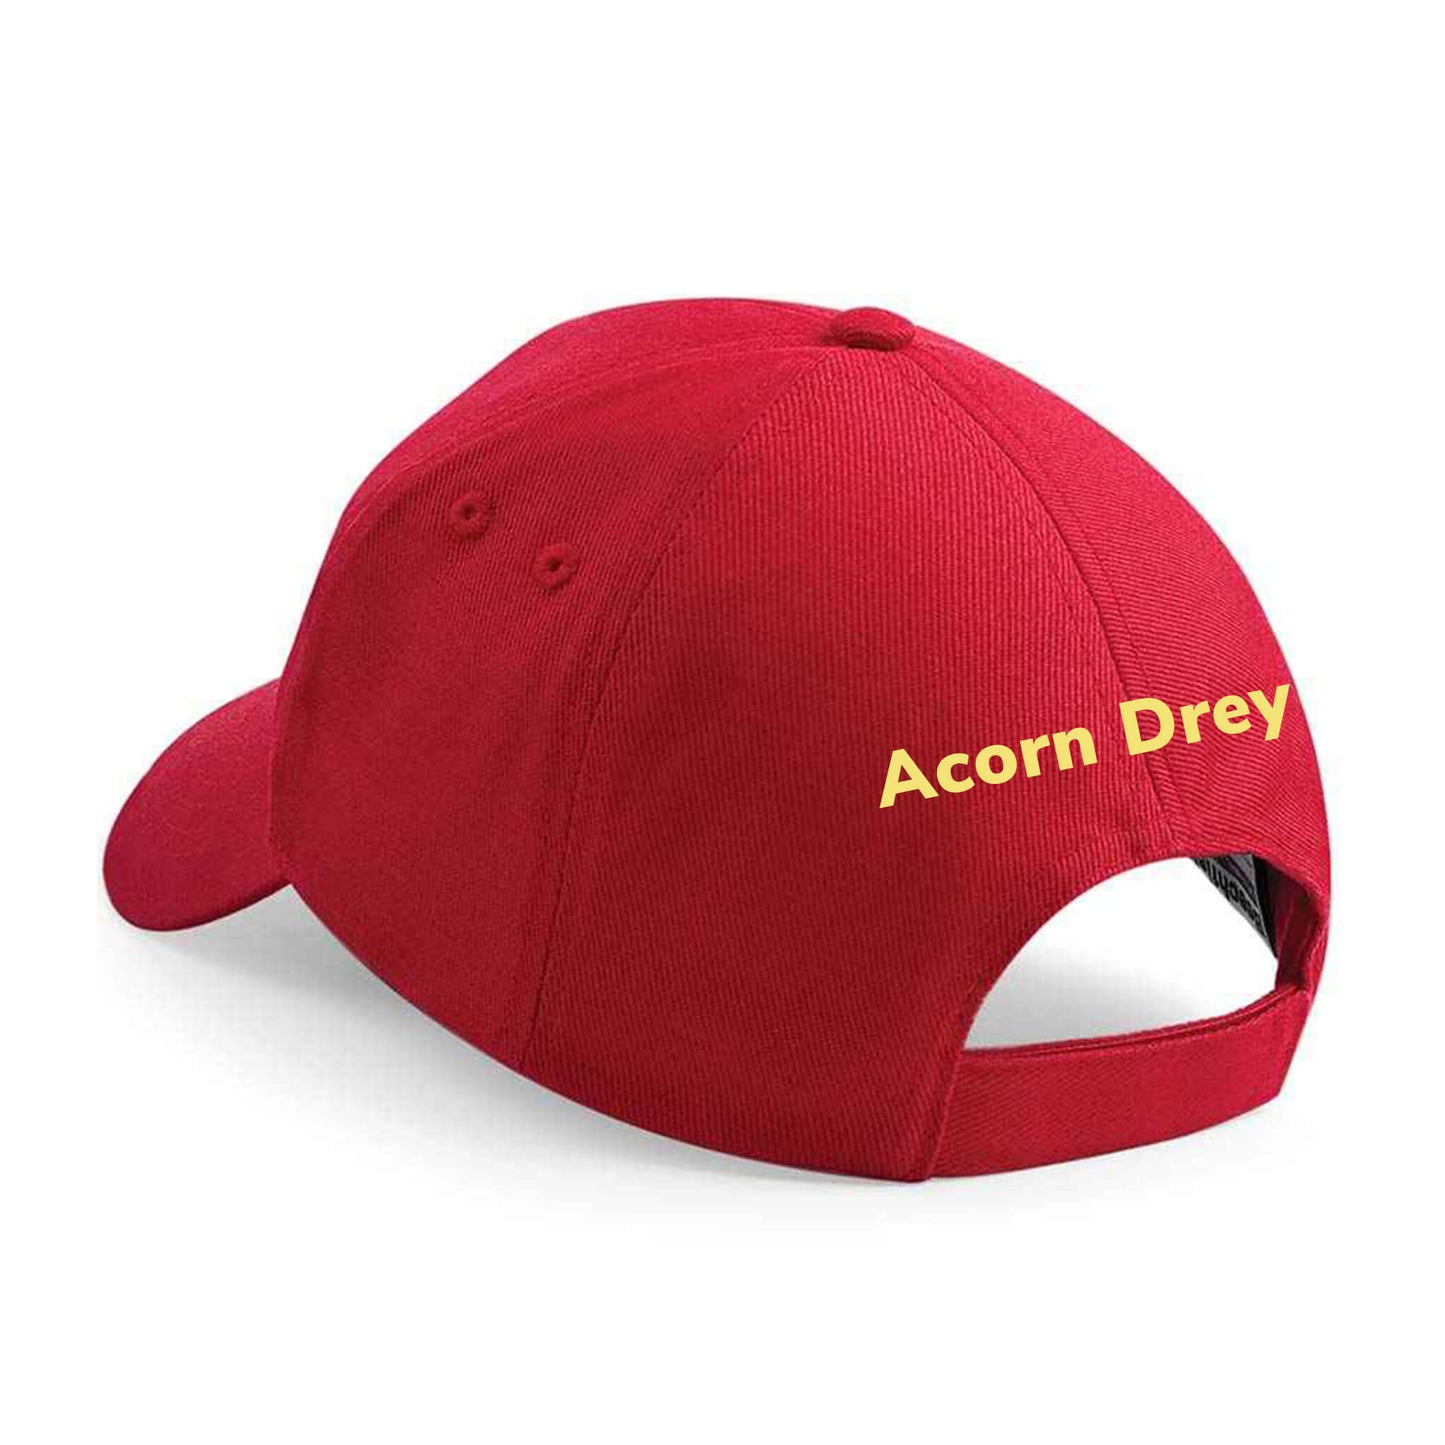 2nd Durrington Sea Scouts Acorn Drey Embroidered Logo Cap 4-8 Years